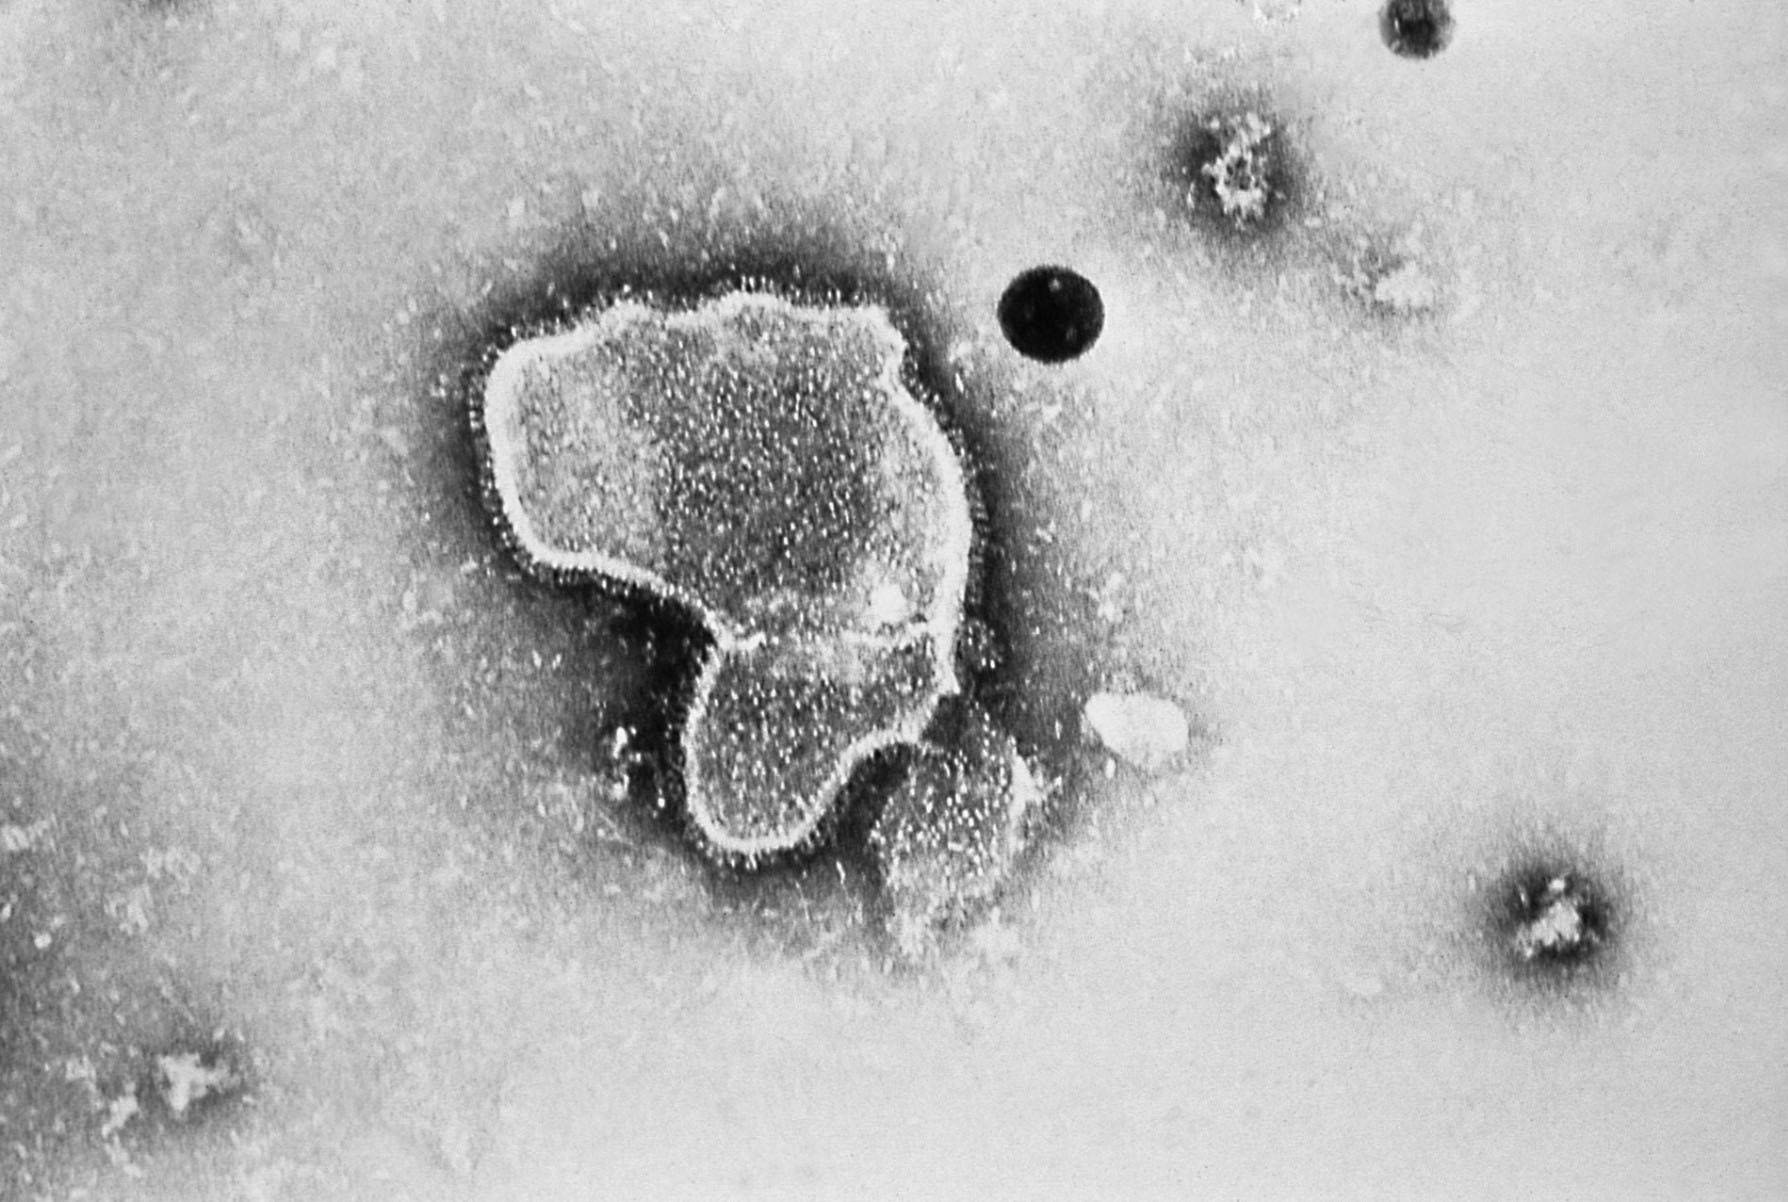 The respiratory syncytial virus mainly spreads via respiratory droplets when a person coughs or sneezes, as well as through direct contact with a contaminated surface — somewhat similar transmission routes to the coronavirus. | CENTERS FOR DISEASE CONTROL AND PREVENTION/VIA KYODO